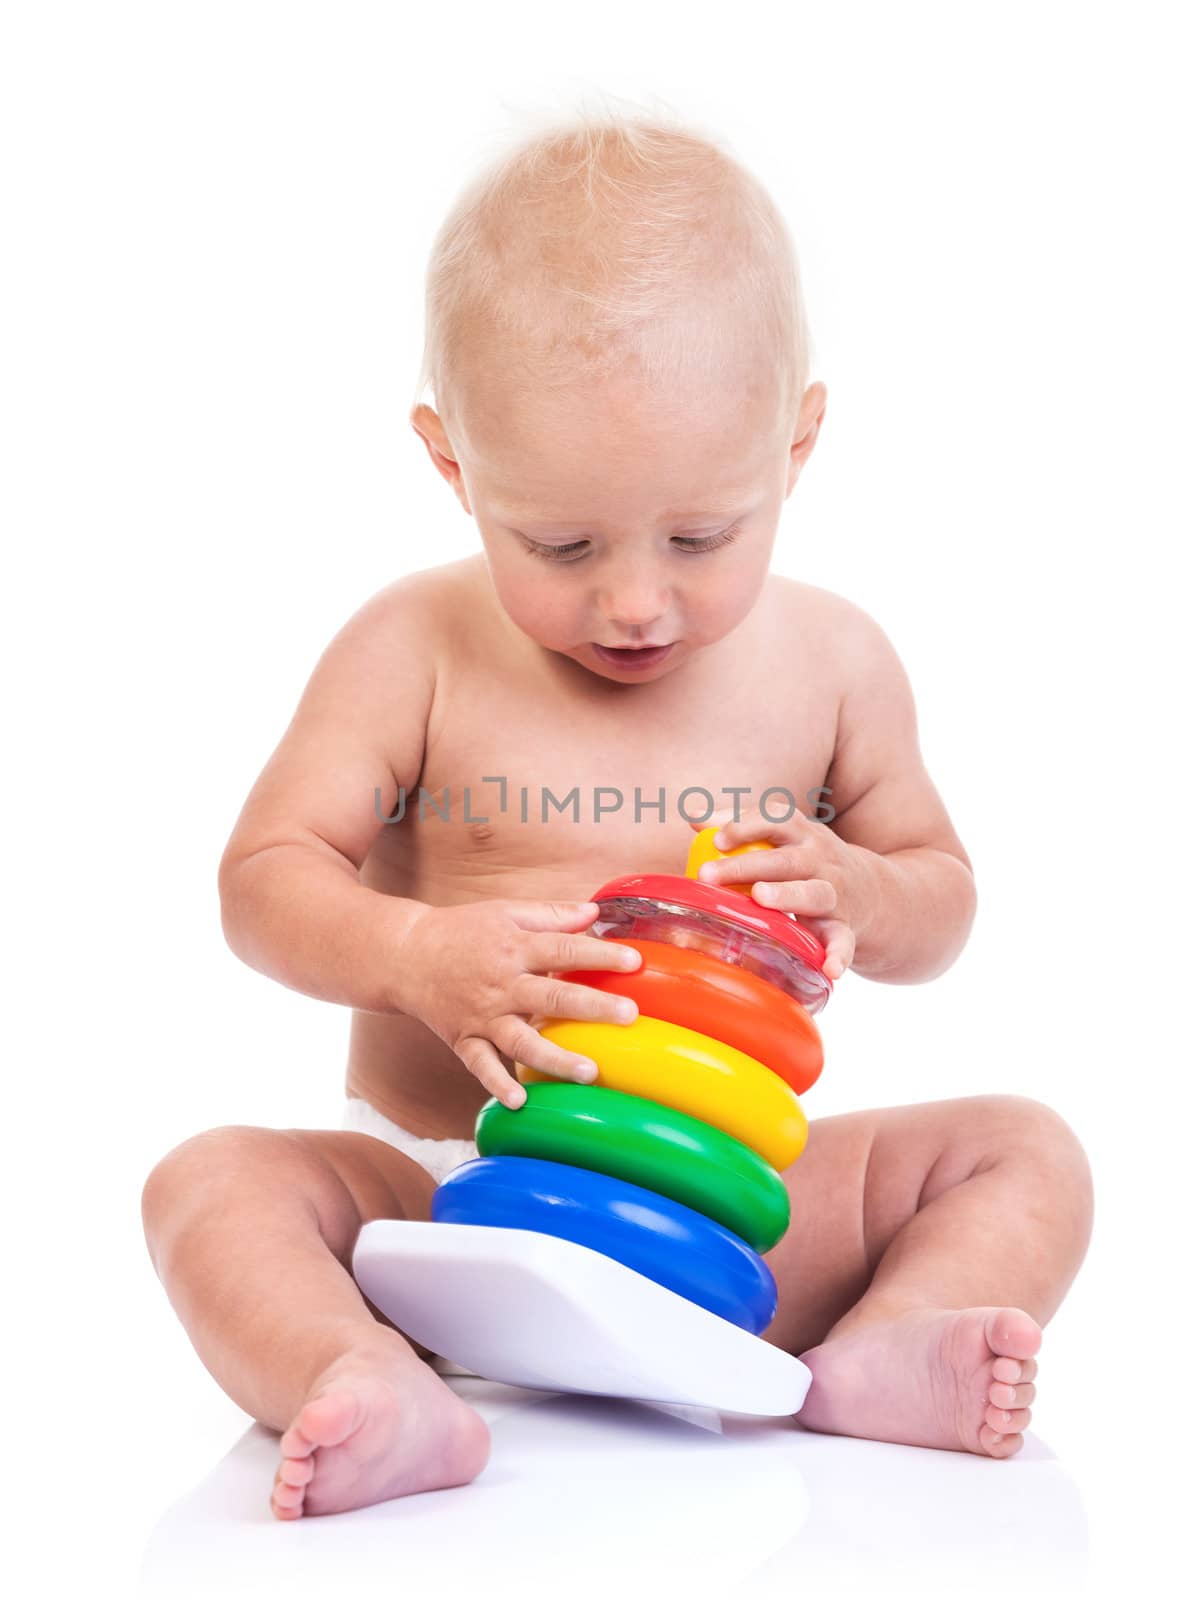 Cute little boy playing with pyramid toy on white by photobac